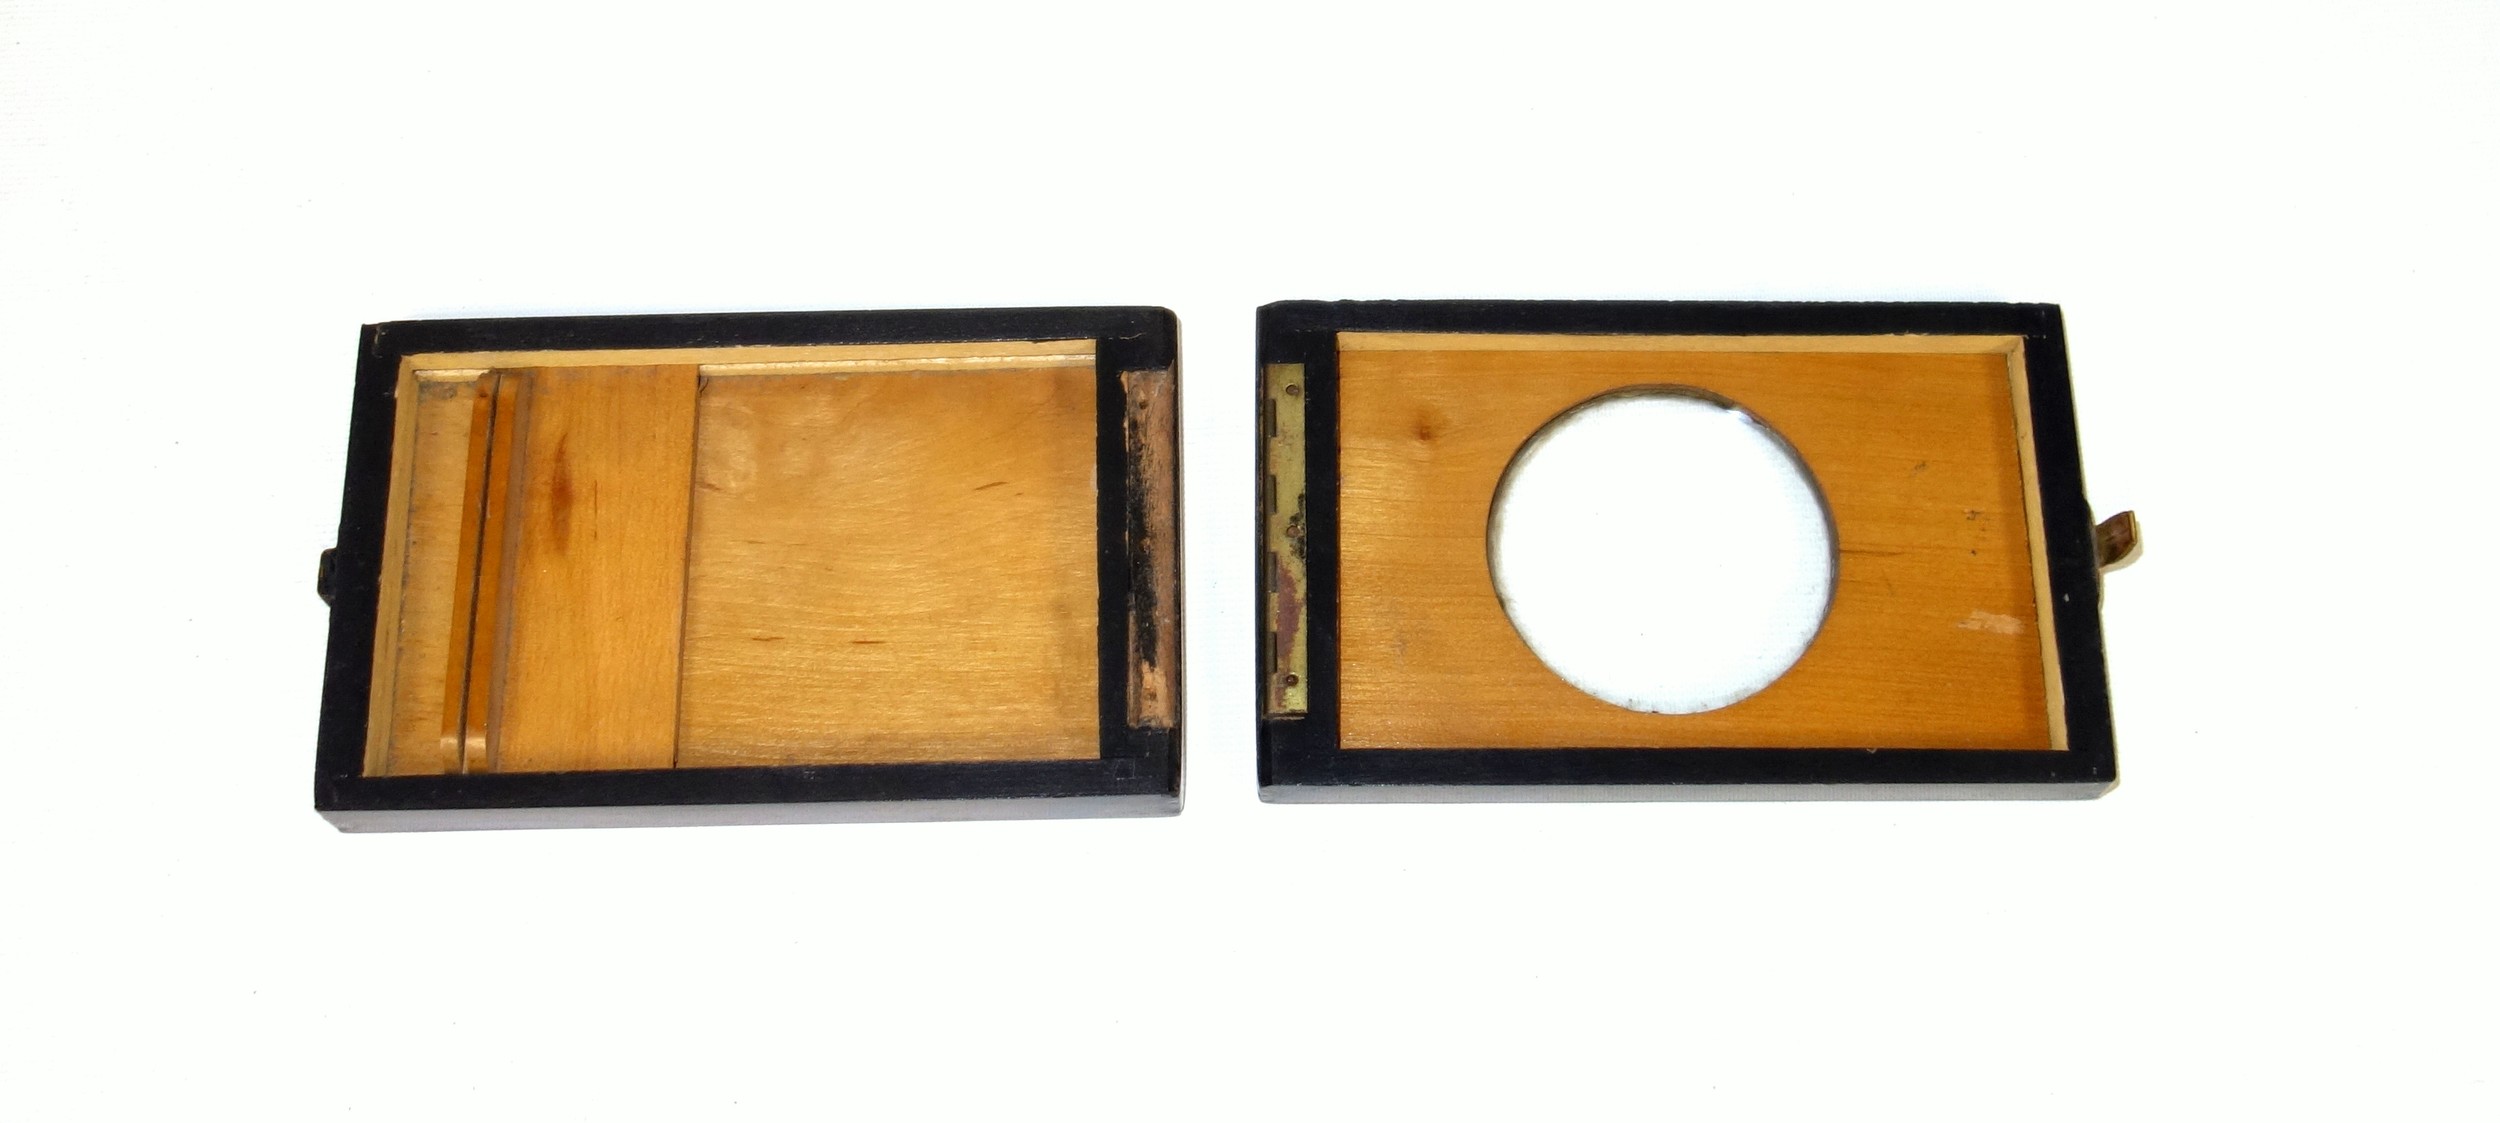 Late 19th Century French walnut table top viewer containing a set of 12 photographic cards of - Image 5 of 5